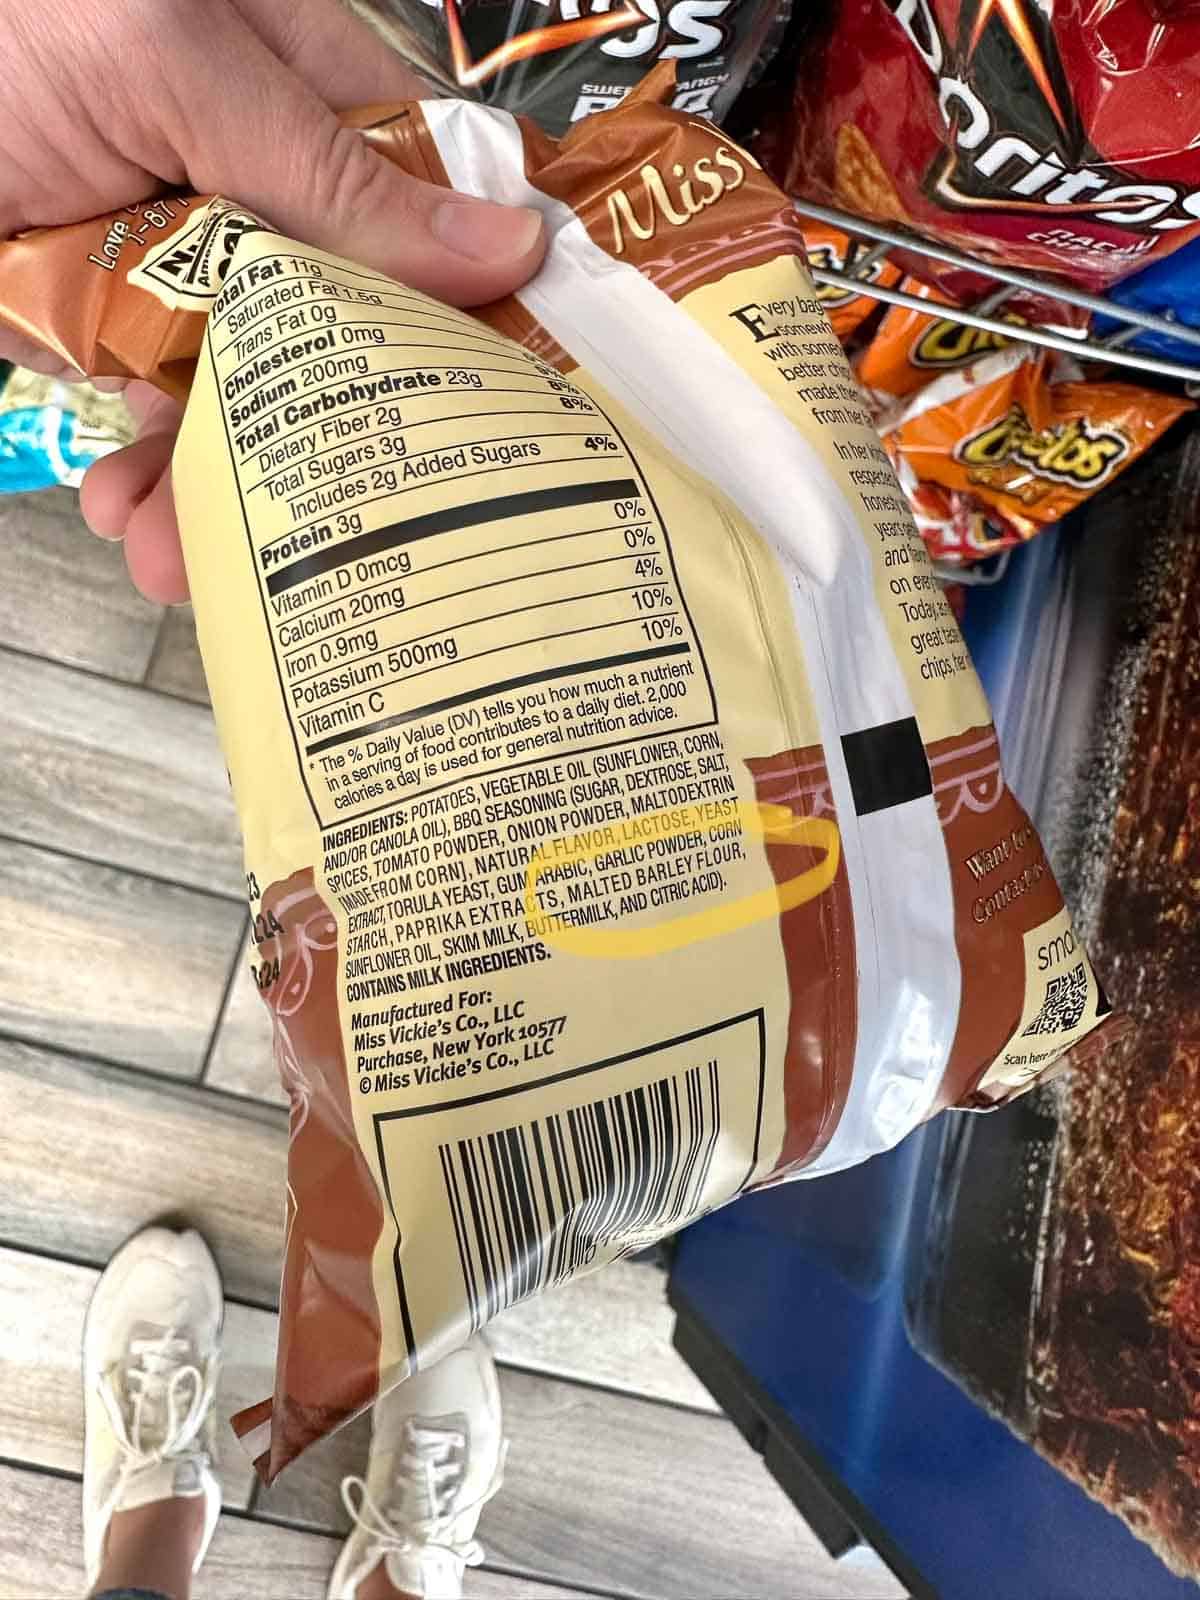 chips label with malted barley flour circled indicating not gluten-free